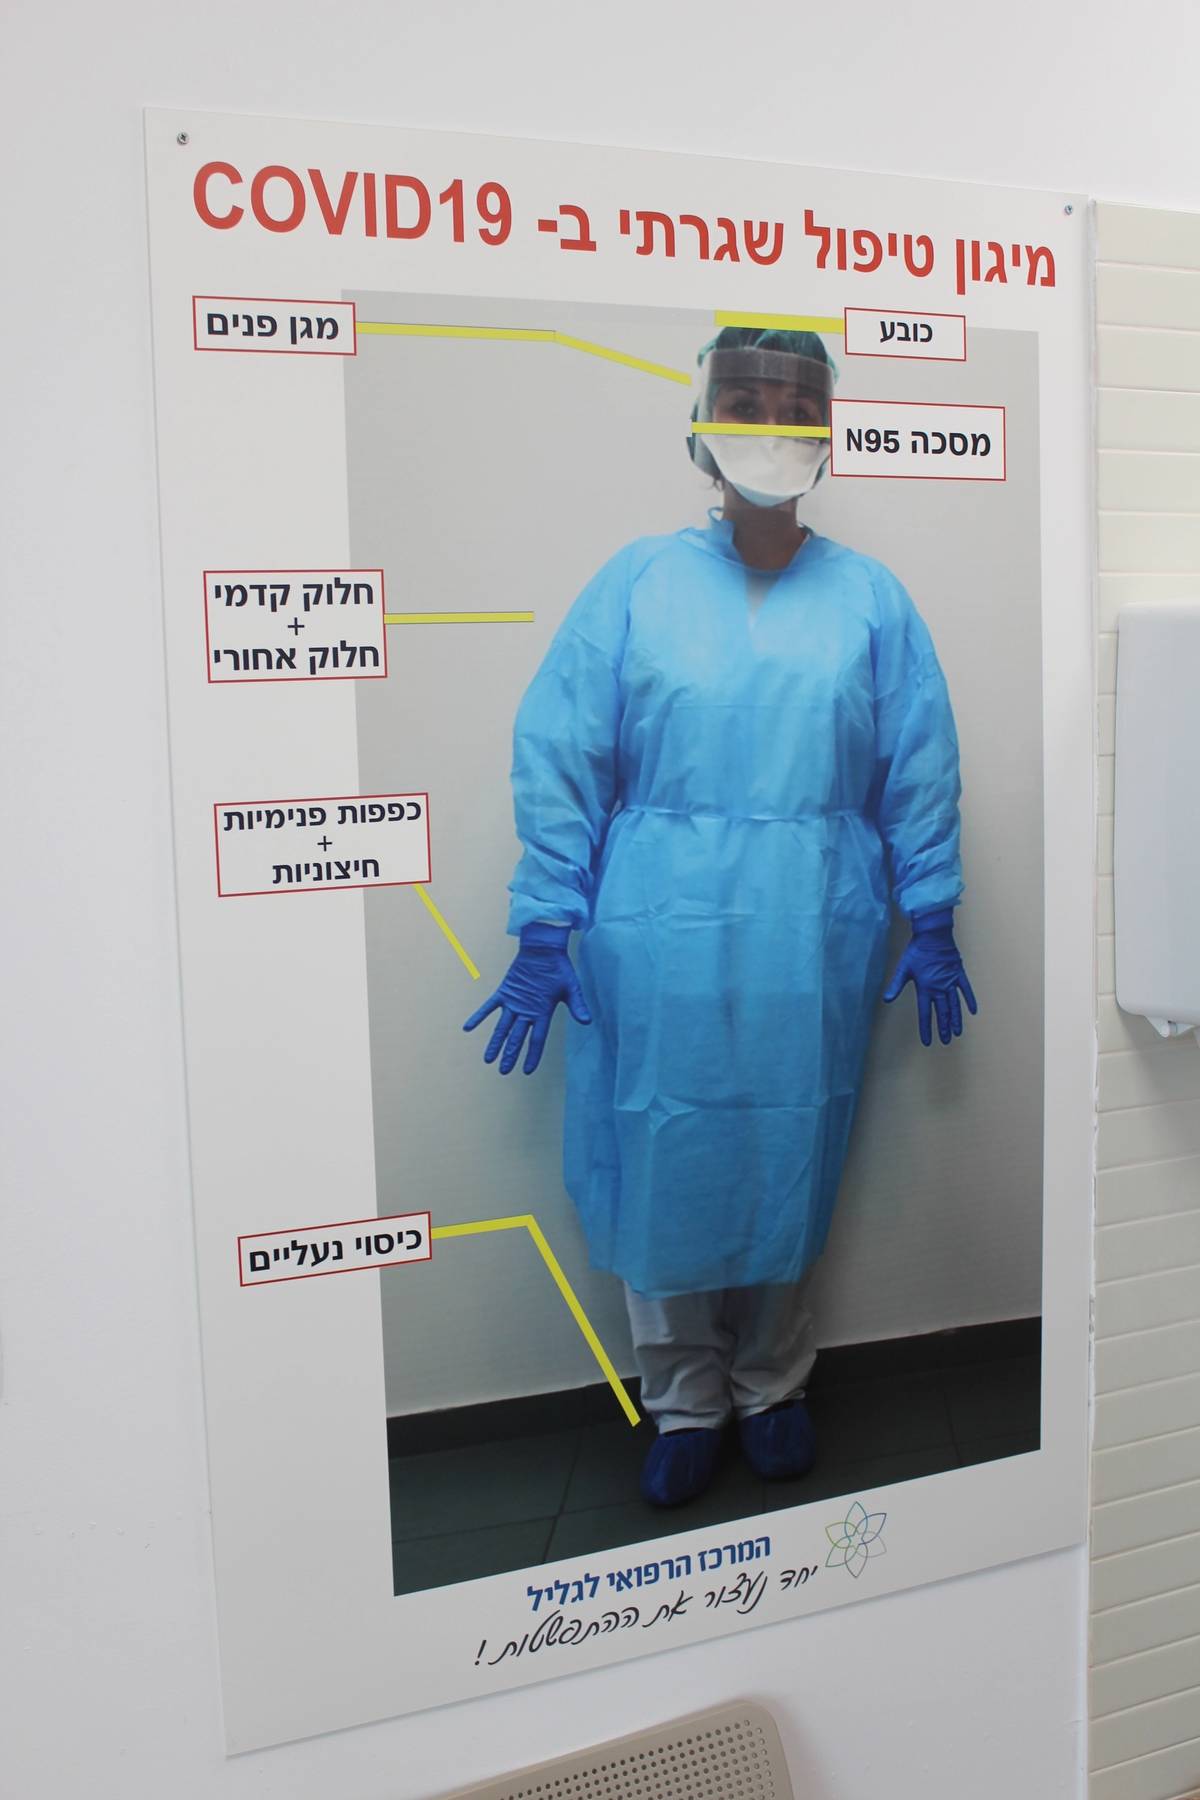 A poster at the Galilee Medical Center demonstrates proper use of personal protective equipment